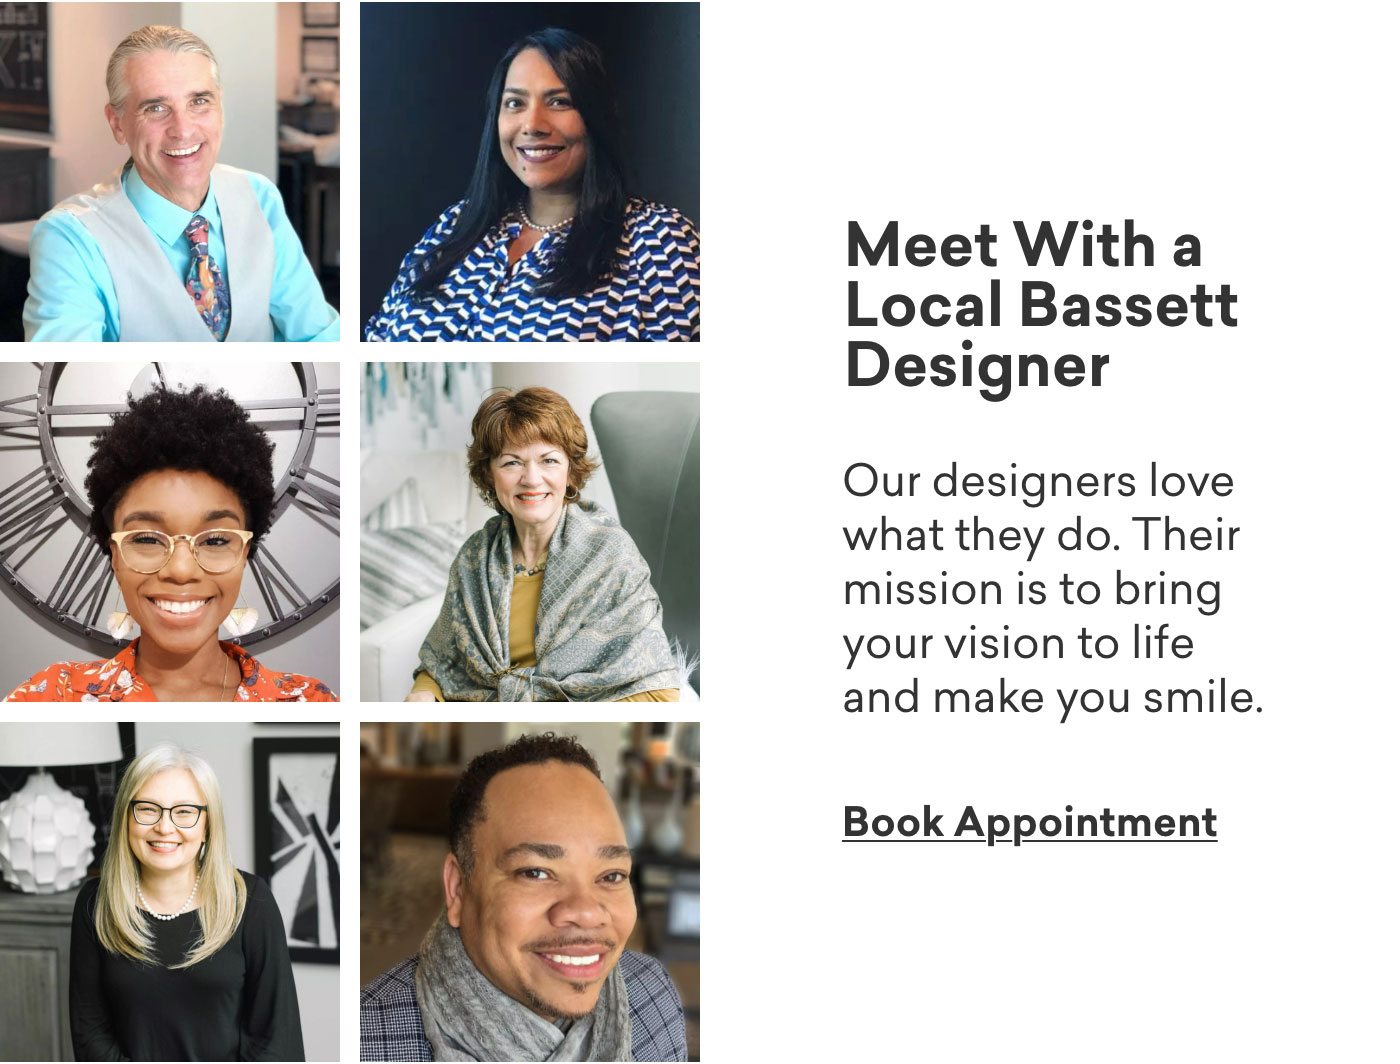 Meet with a local Bassett designer. Our designers love what they do. Their mission is to bring your vision to life and make you smile. Book Appointment. 